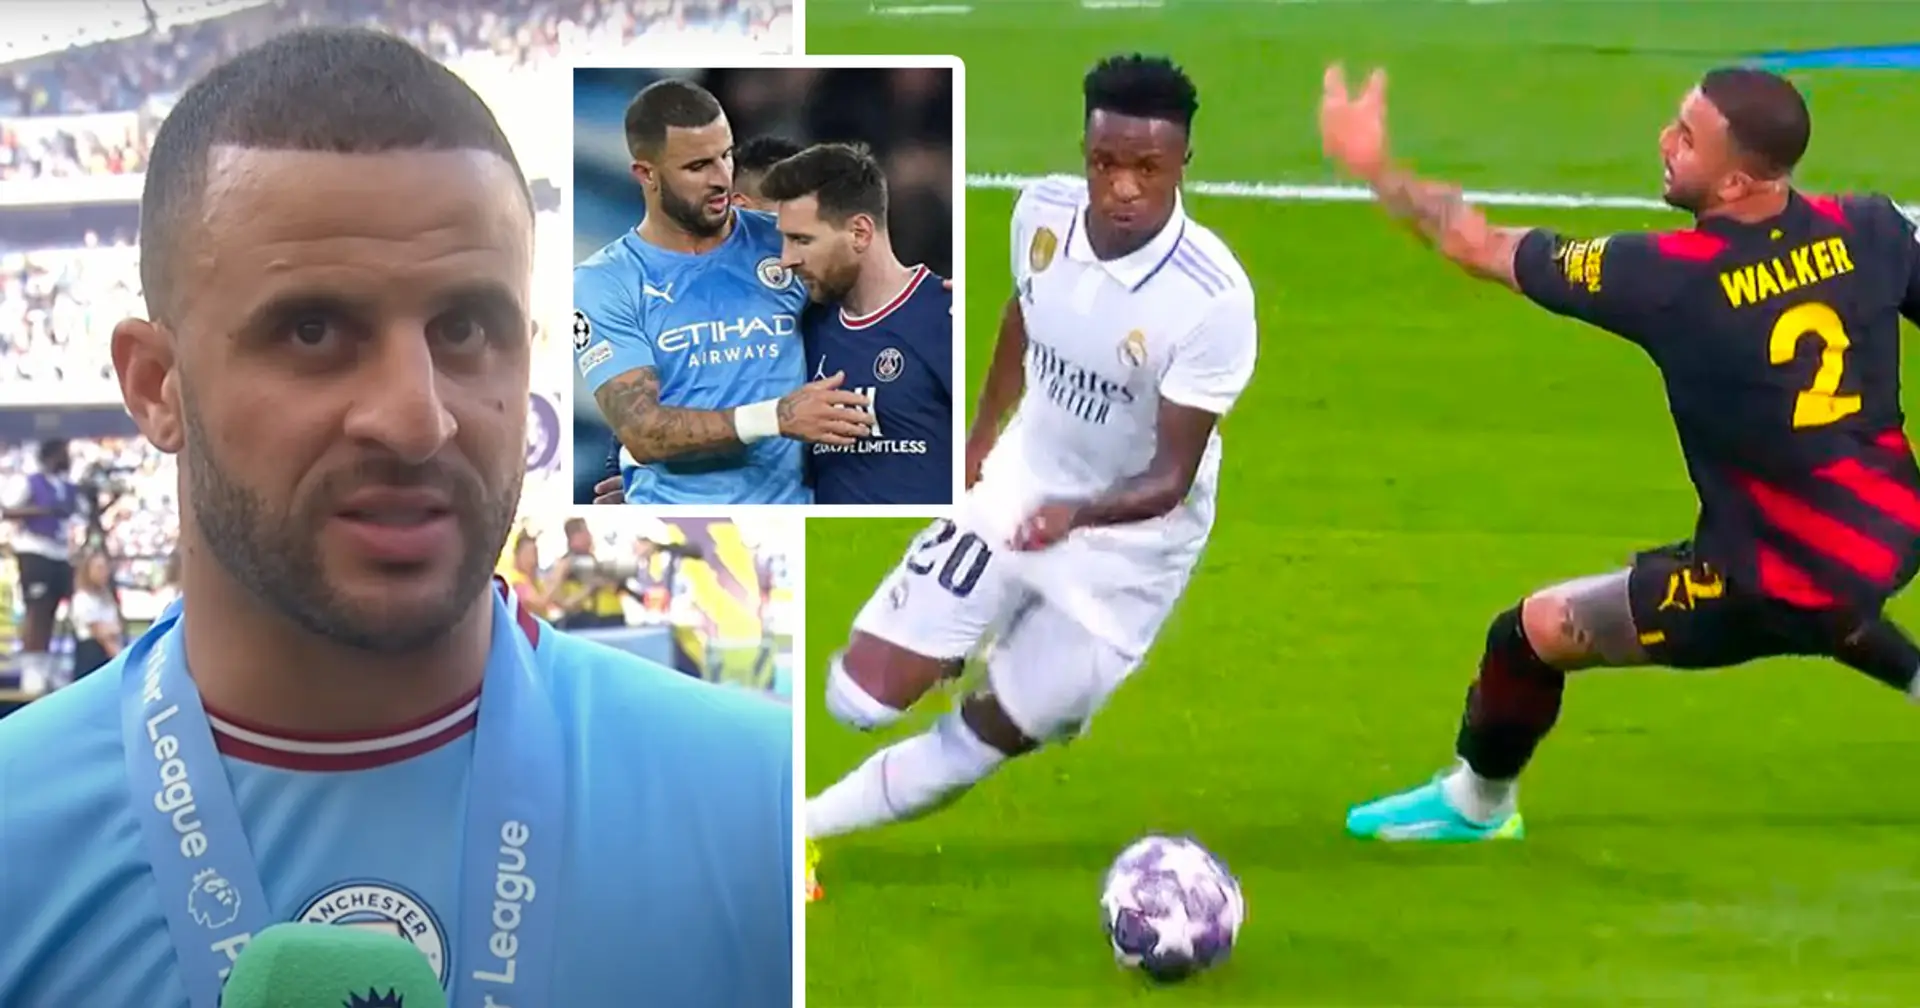 Kyle Walker names his four toughest opponents - didn't mention Messi and Ronaldo